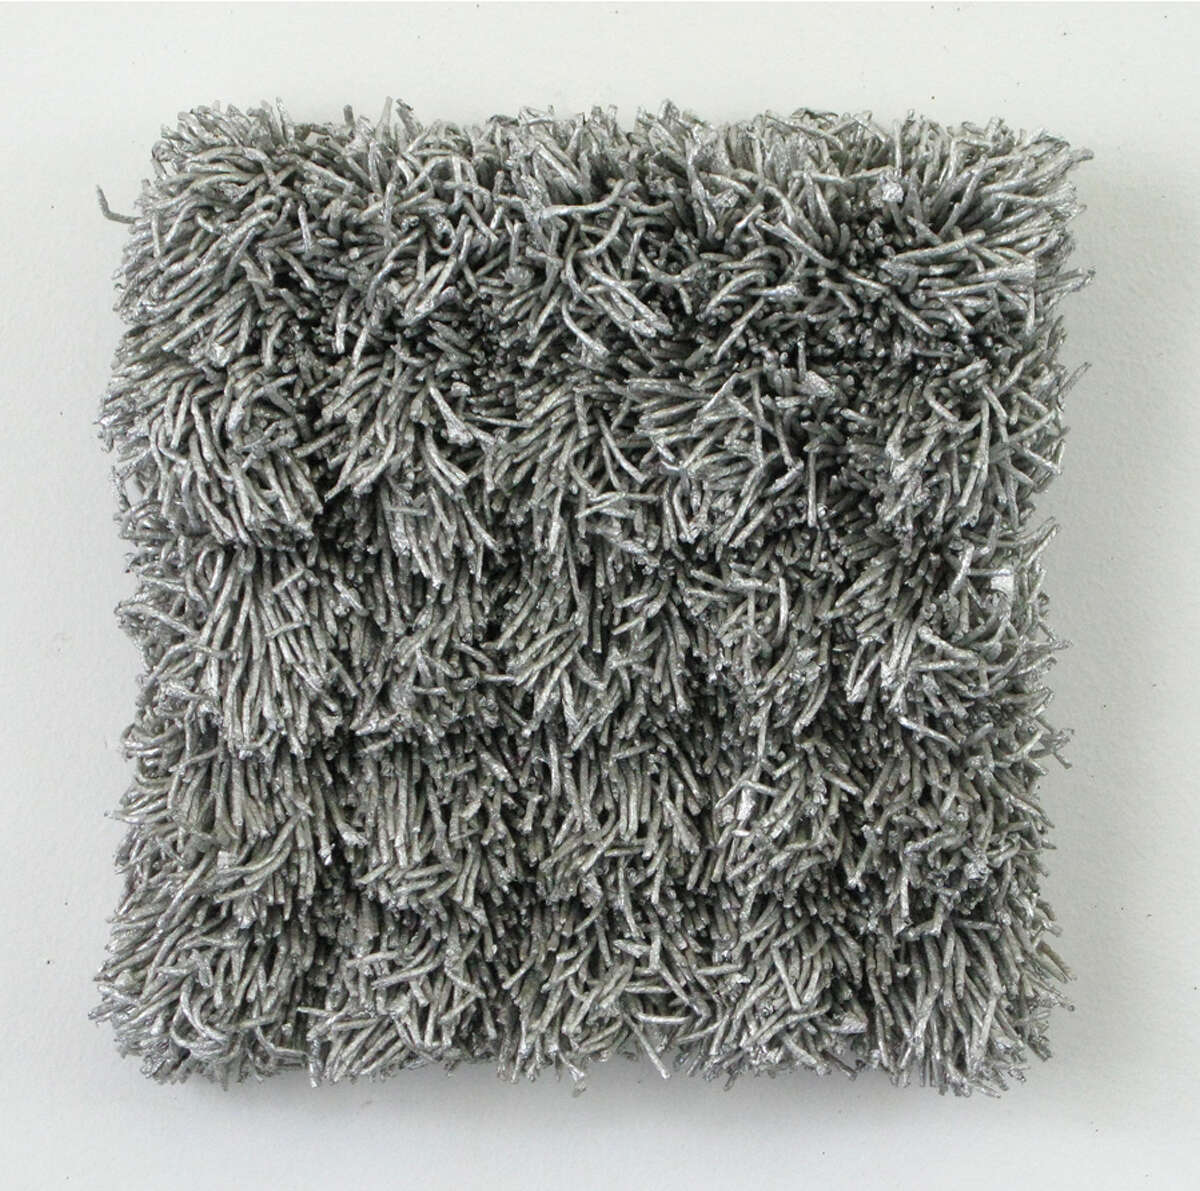 Susie Rosmarin's "Untitled (Aluminum Grid)" is among works in "Right Here, Right Now, v. 2" at the Contemporary Â Arts Museum Houston. (Â 1988. Aluminum foil, stainless steel mesh, 22 x 20 x 4 1/2 inches. Courtesy the artist and Texas Gallery, Houston. Image courtesy Texas Gallery, Houston.)